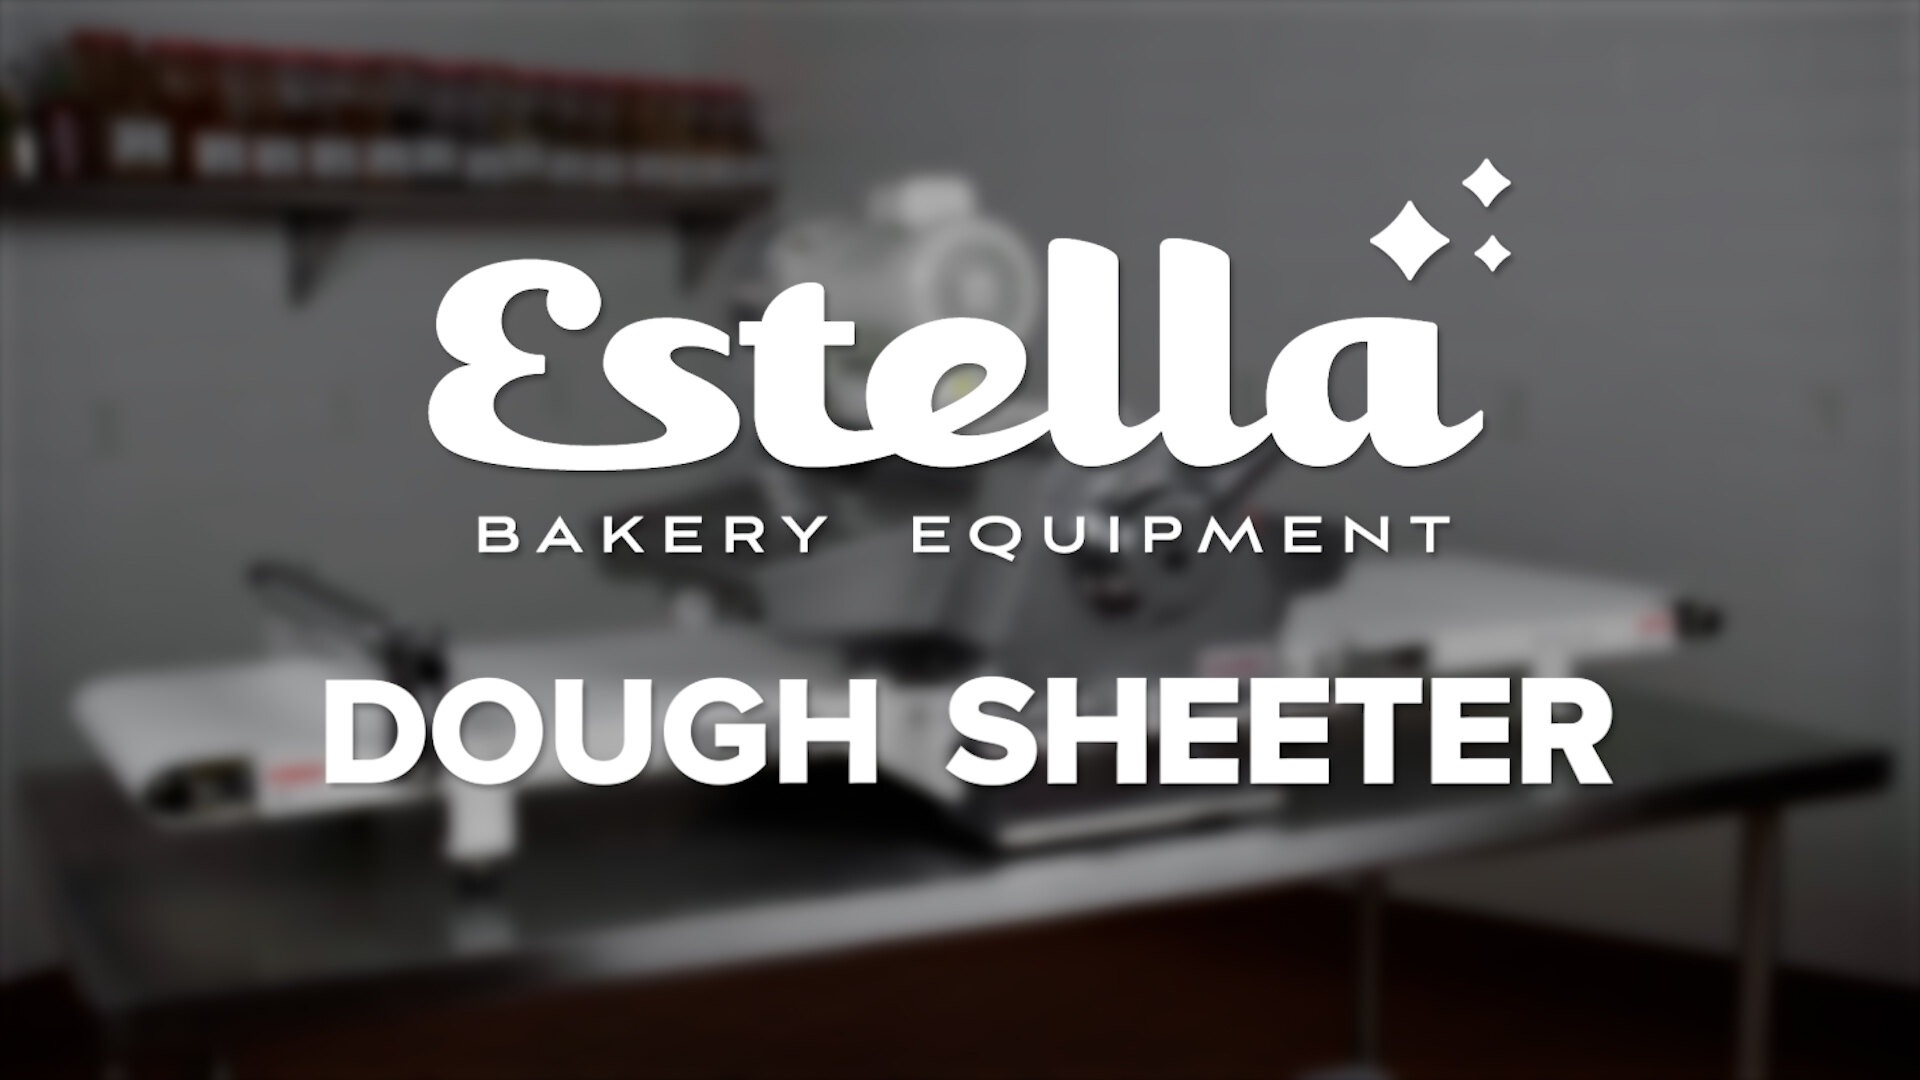 Estella EDS12D 12 Countertop Two Stage Dough Sheeter - 120V, 1/2 HP